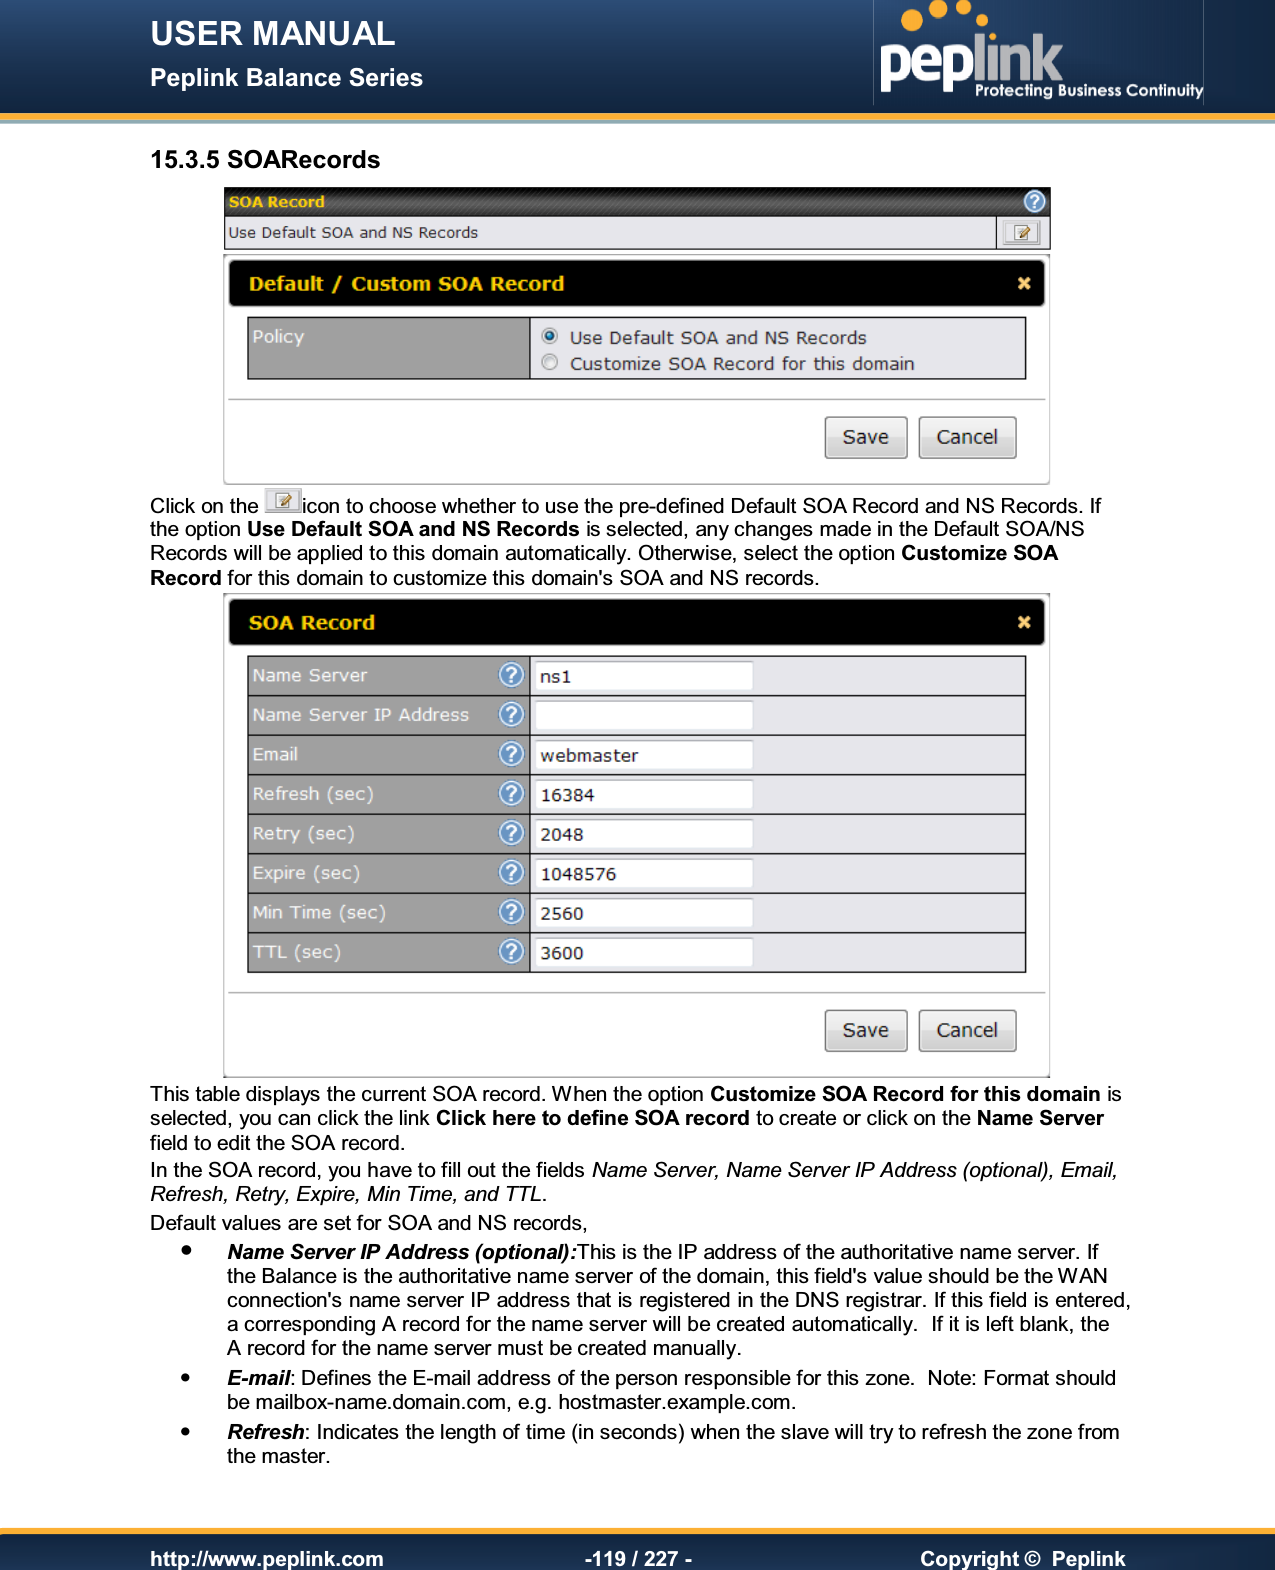 USER MANUAL Peplink Balance Series   http://www.peplink.com -119 / 227 -  Copyright ©  Peplink 15.3.5 SOARecords   Click on the  icon to choose whether to use the pre-defined Default SOA Record and NS Records. If the option Use Default SOA and NS Records is selected, any changes made in the Default SOA/NS Records will be applied to this domain automatically. Otherwise, select the option Customize SOA Record for this domain to customize this domain&apos;s SOA and NS records.  This table displays the current SOA record. When the option Customize SOA Record for this domain is selected, you can click the link Click here to define SOA record to create or click on the Name Server field to edit the SOA record. In the SOA record, you have to fill out the fields Name Server, Name Server IP Address (optional), Email, Refresh, Retry, Expire, Min Time, and TTL. Default values are set for SOA and NS records,  Name Server IP Address (optional):This is the IP address of the authoritative name server. If the Balance is the authoritative name server of the domain, this field&apos;s value should be the WAN connection&apos;s name server IP address that is registered in the DNS registrar. If this field is entered, a corresponding A record for the name server will be created automatically.  If it is left blank, the A record for the name server must be created manually.  E-mail: Defines the E-mail address of the person responsible for this zone.  Note: Format should be mailbox-name.domain.com, e.g. hostmaster.example.com.  Refresh: Indicates the length of time (in seconds) when the slave will try to refresh the zone from the master. 